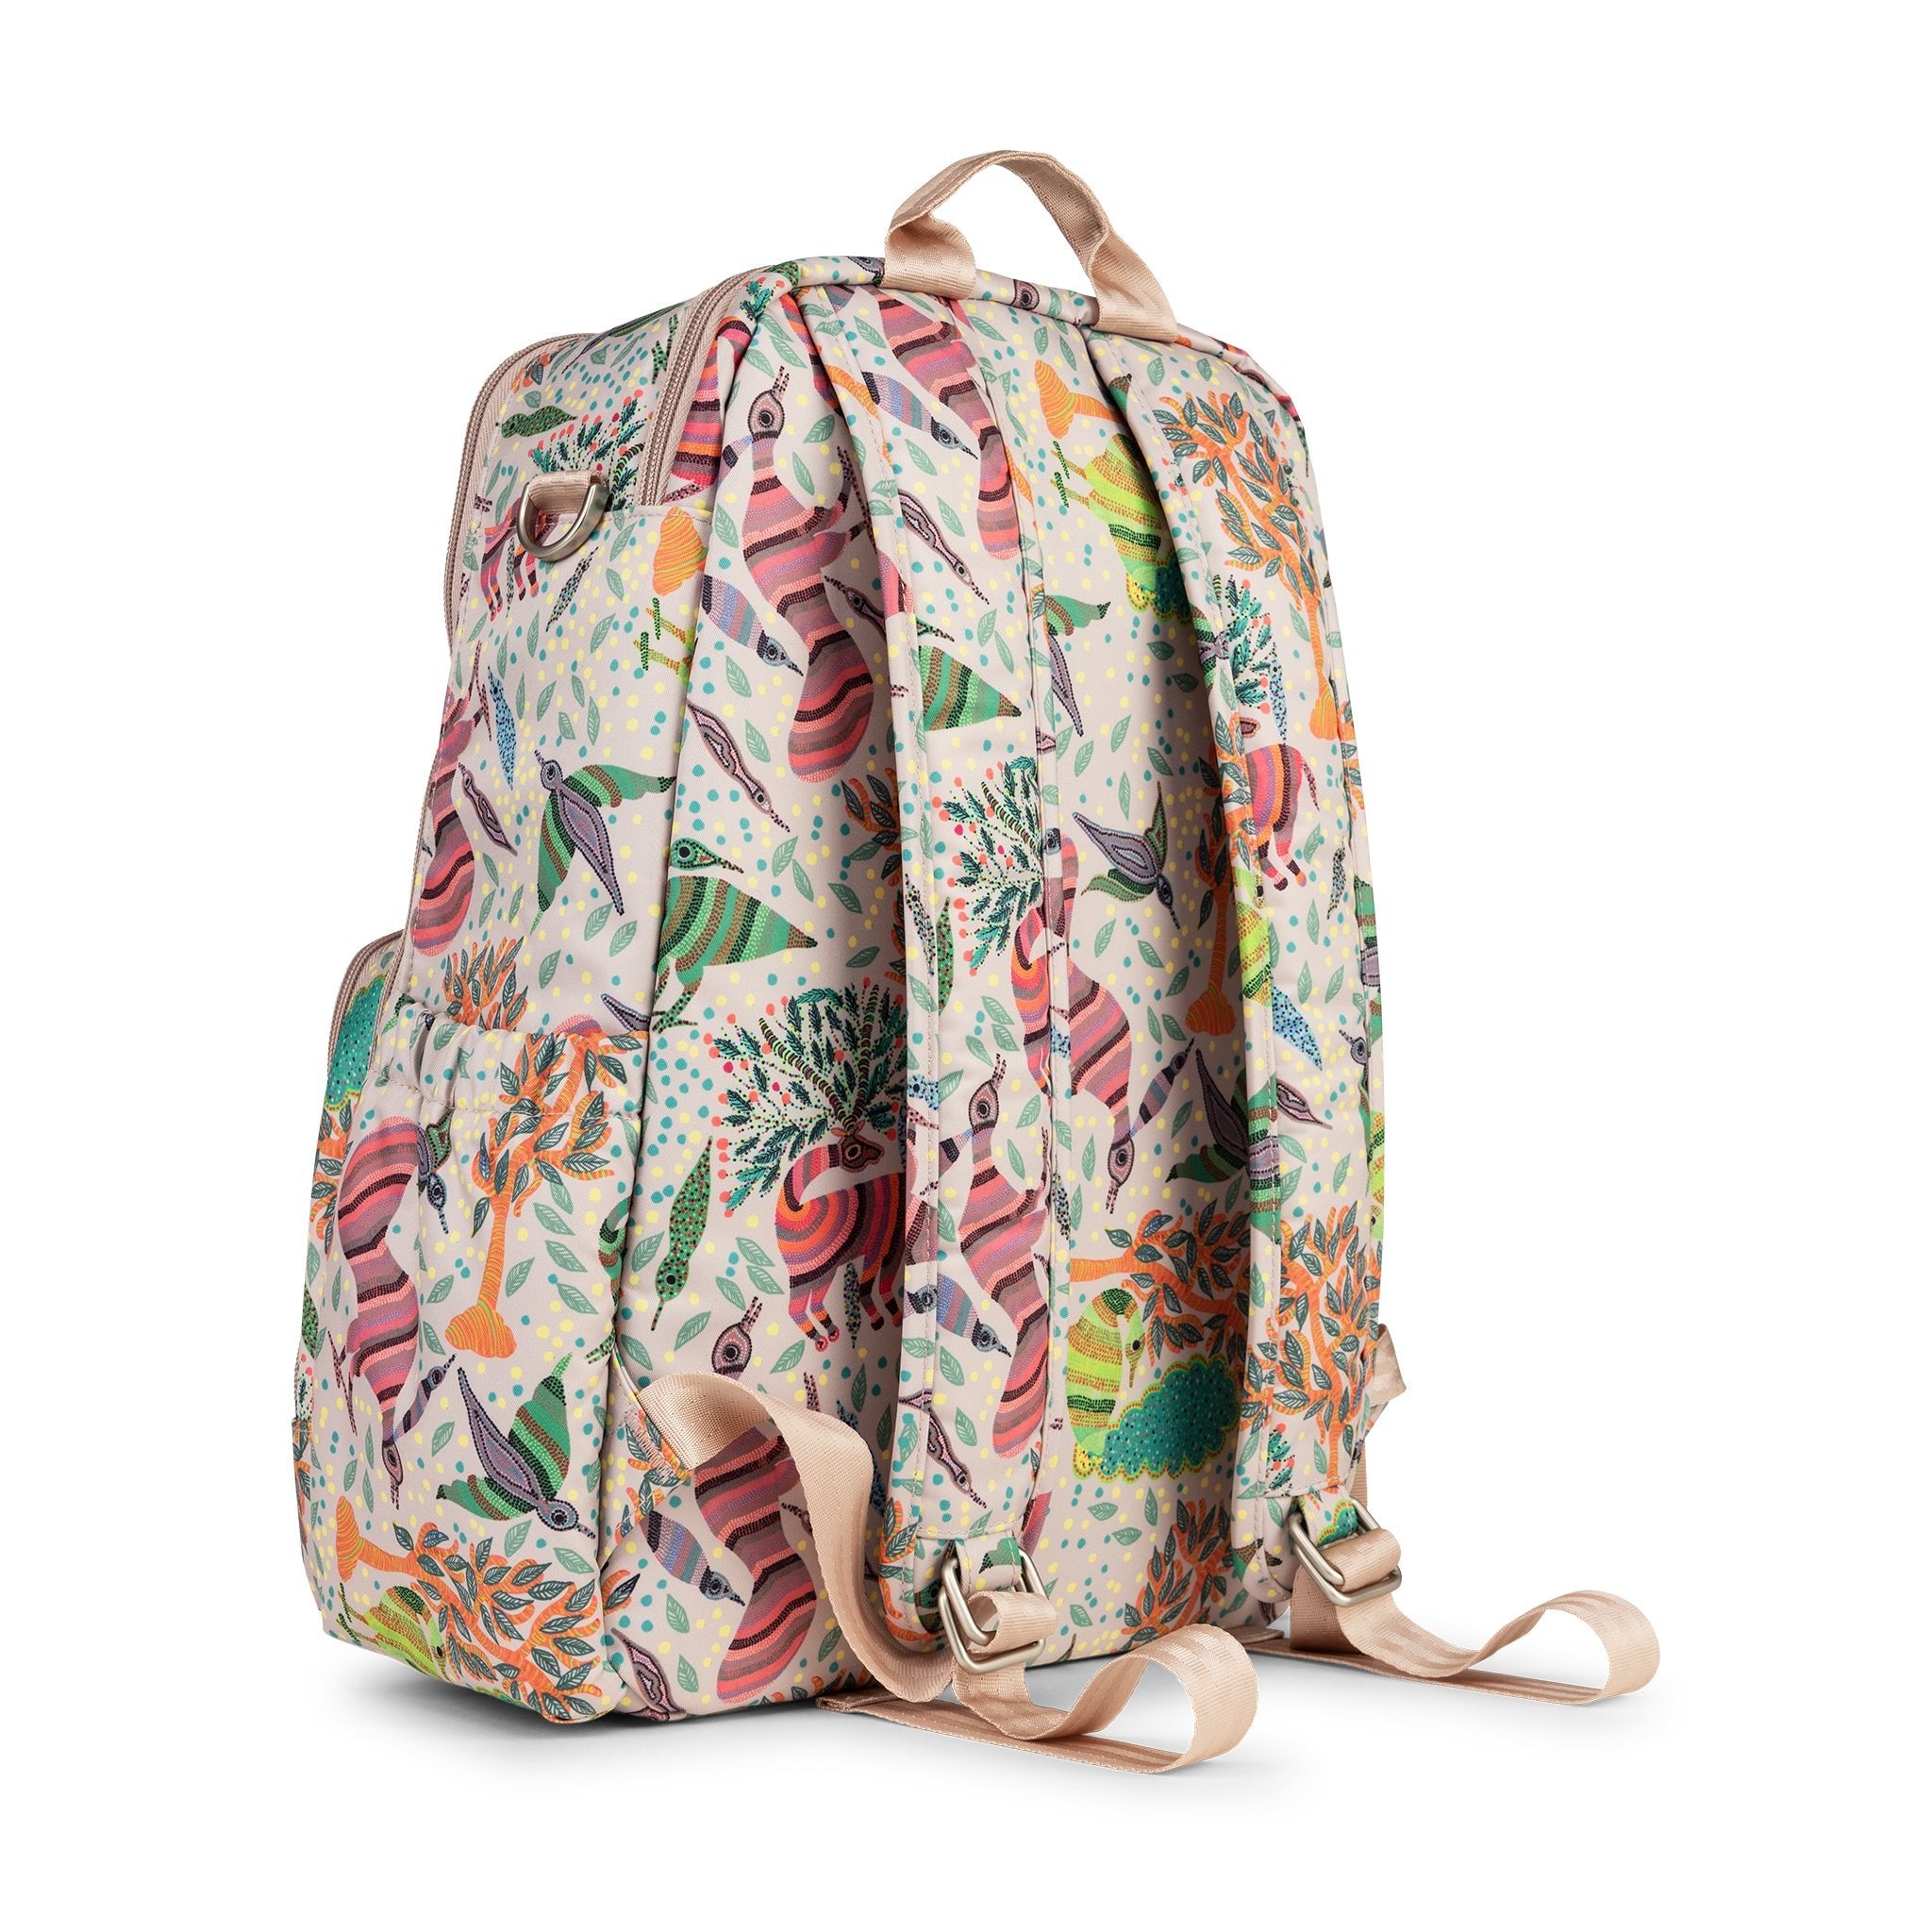 Zealous Backpack - Wild Life by Roots Studio - SuperMom Headquarters